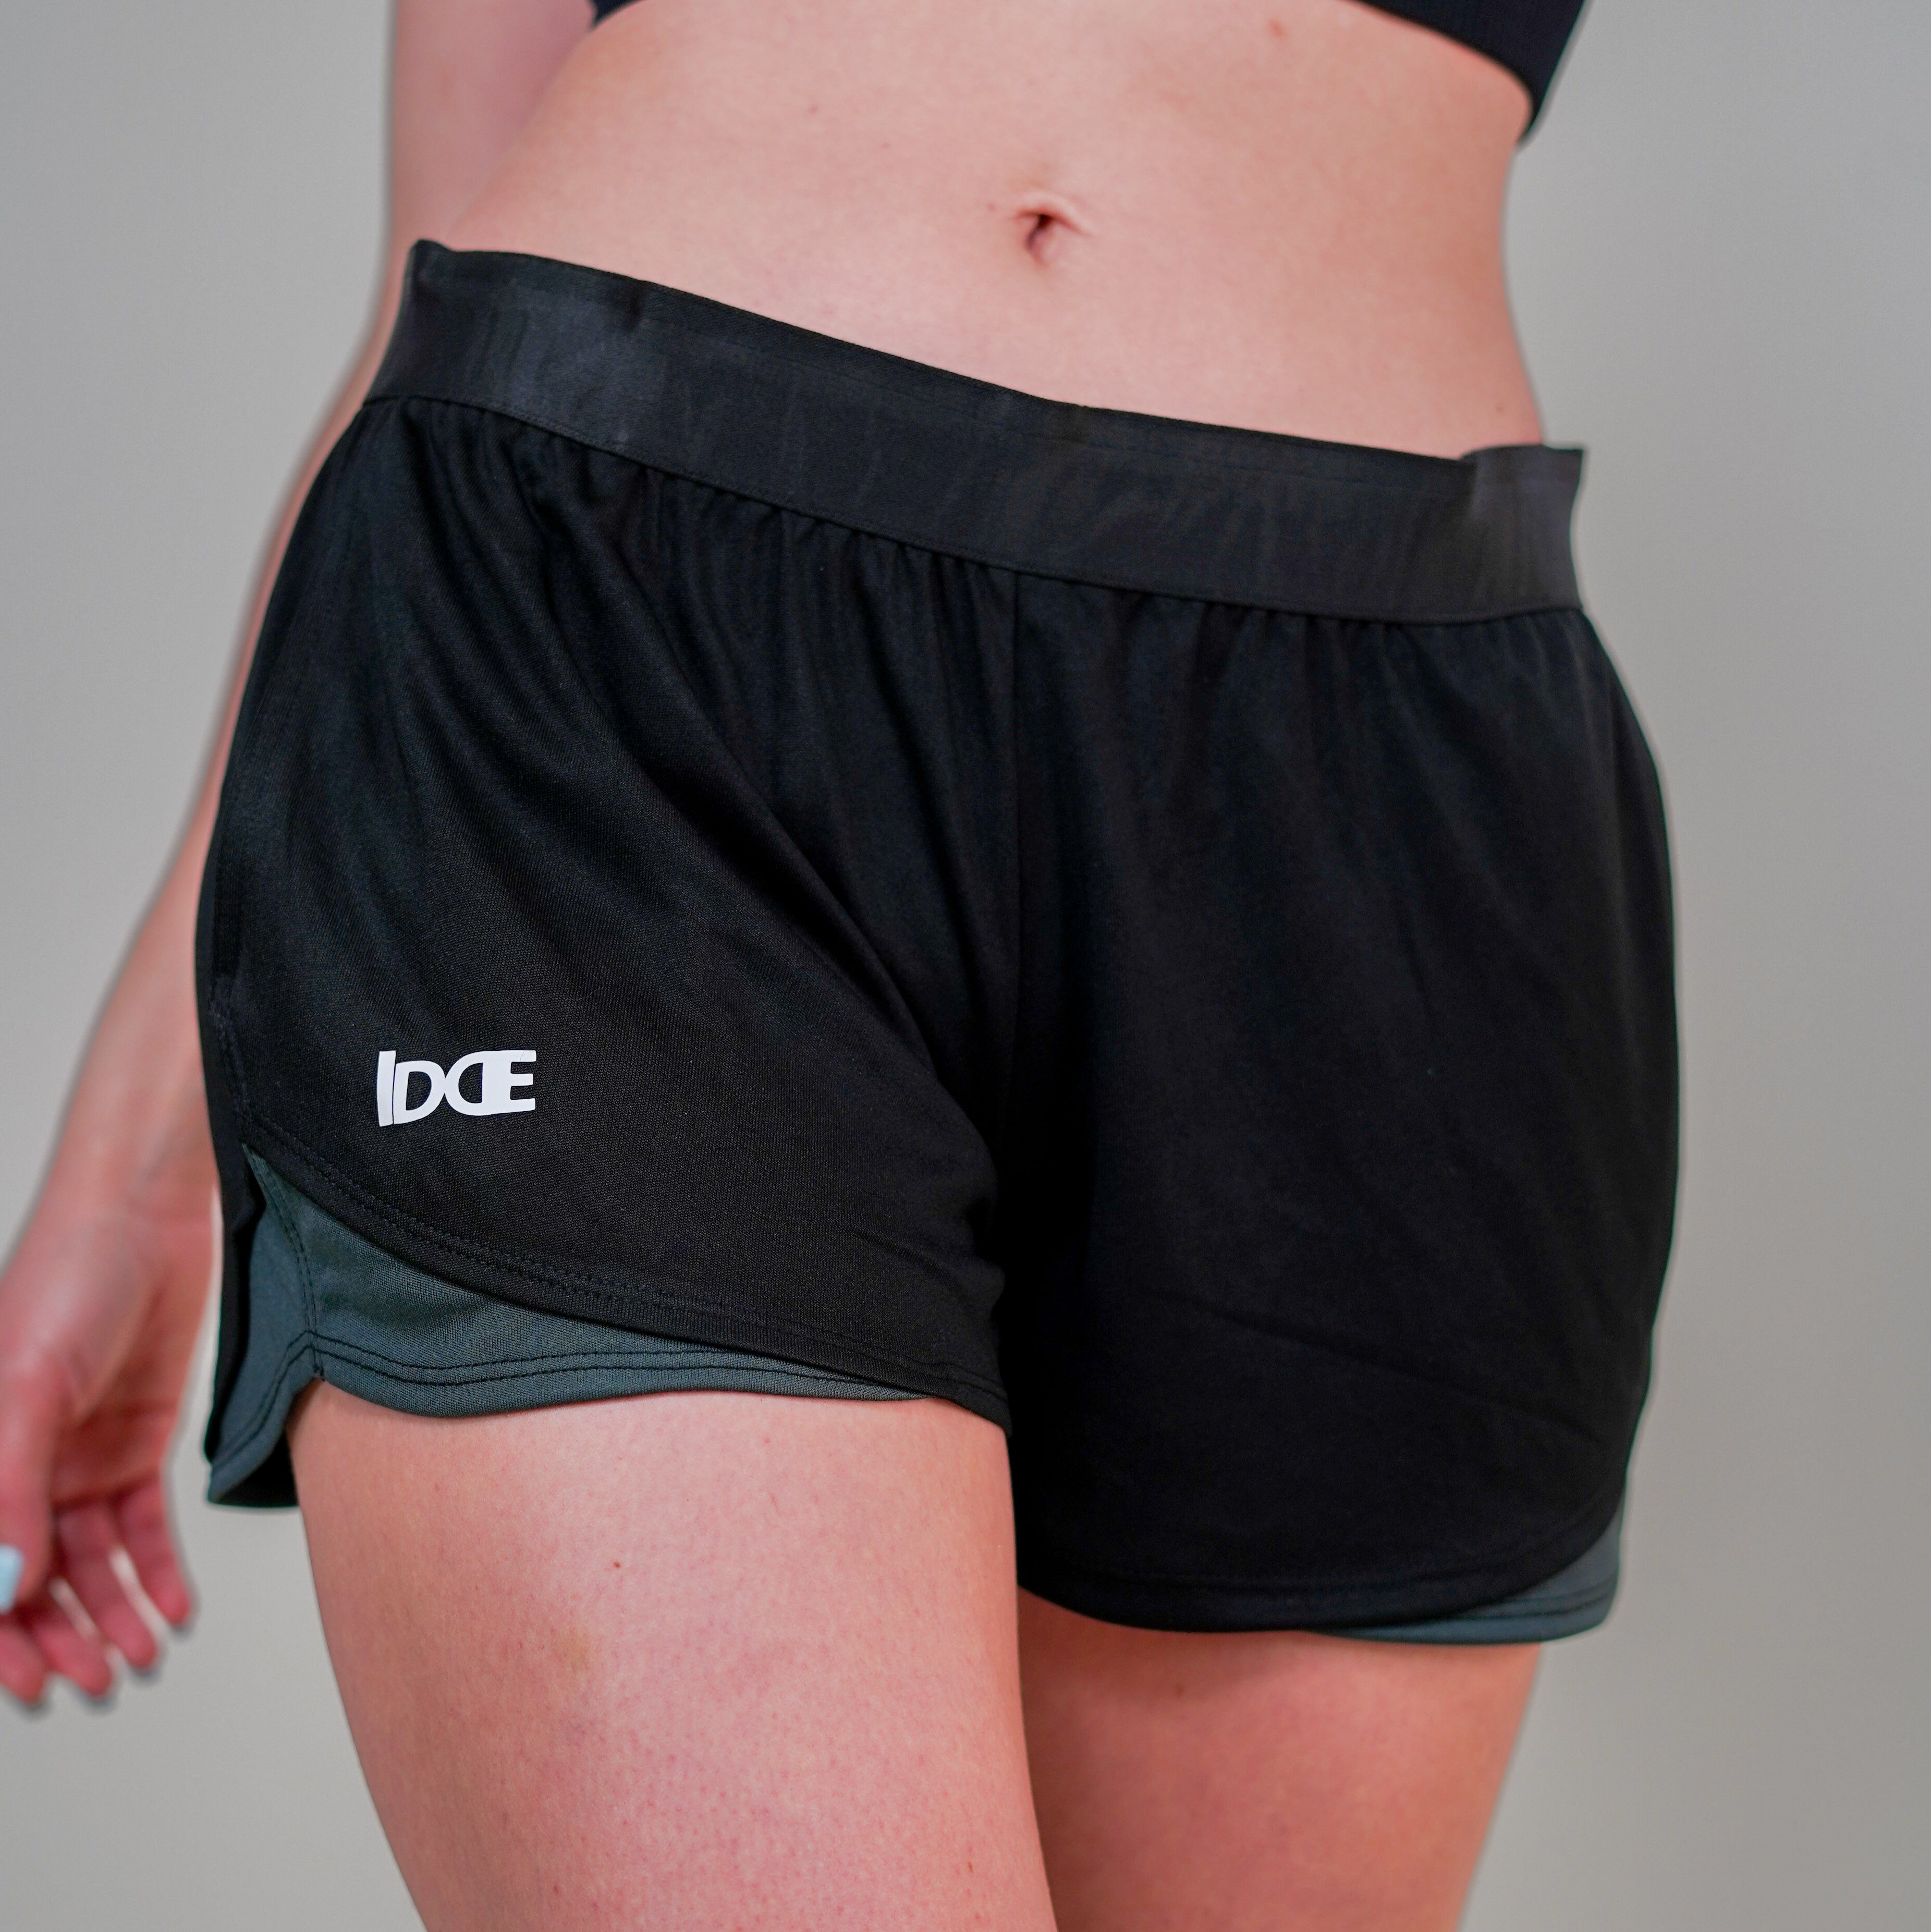 THE GYM PEOPLE Womens' Running Shorts with Loose Mauritius